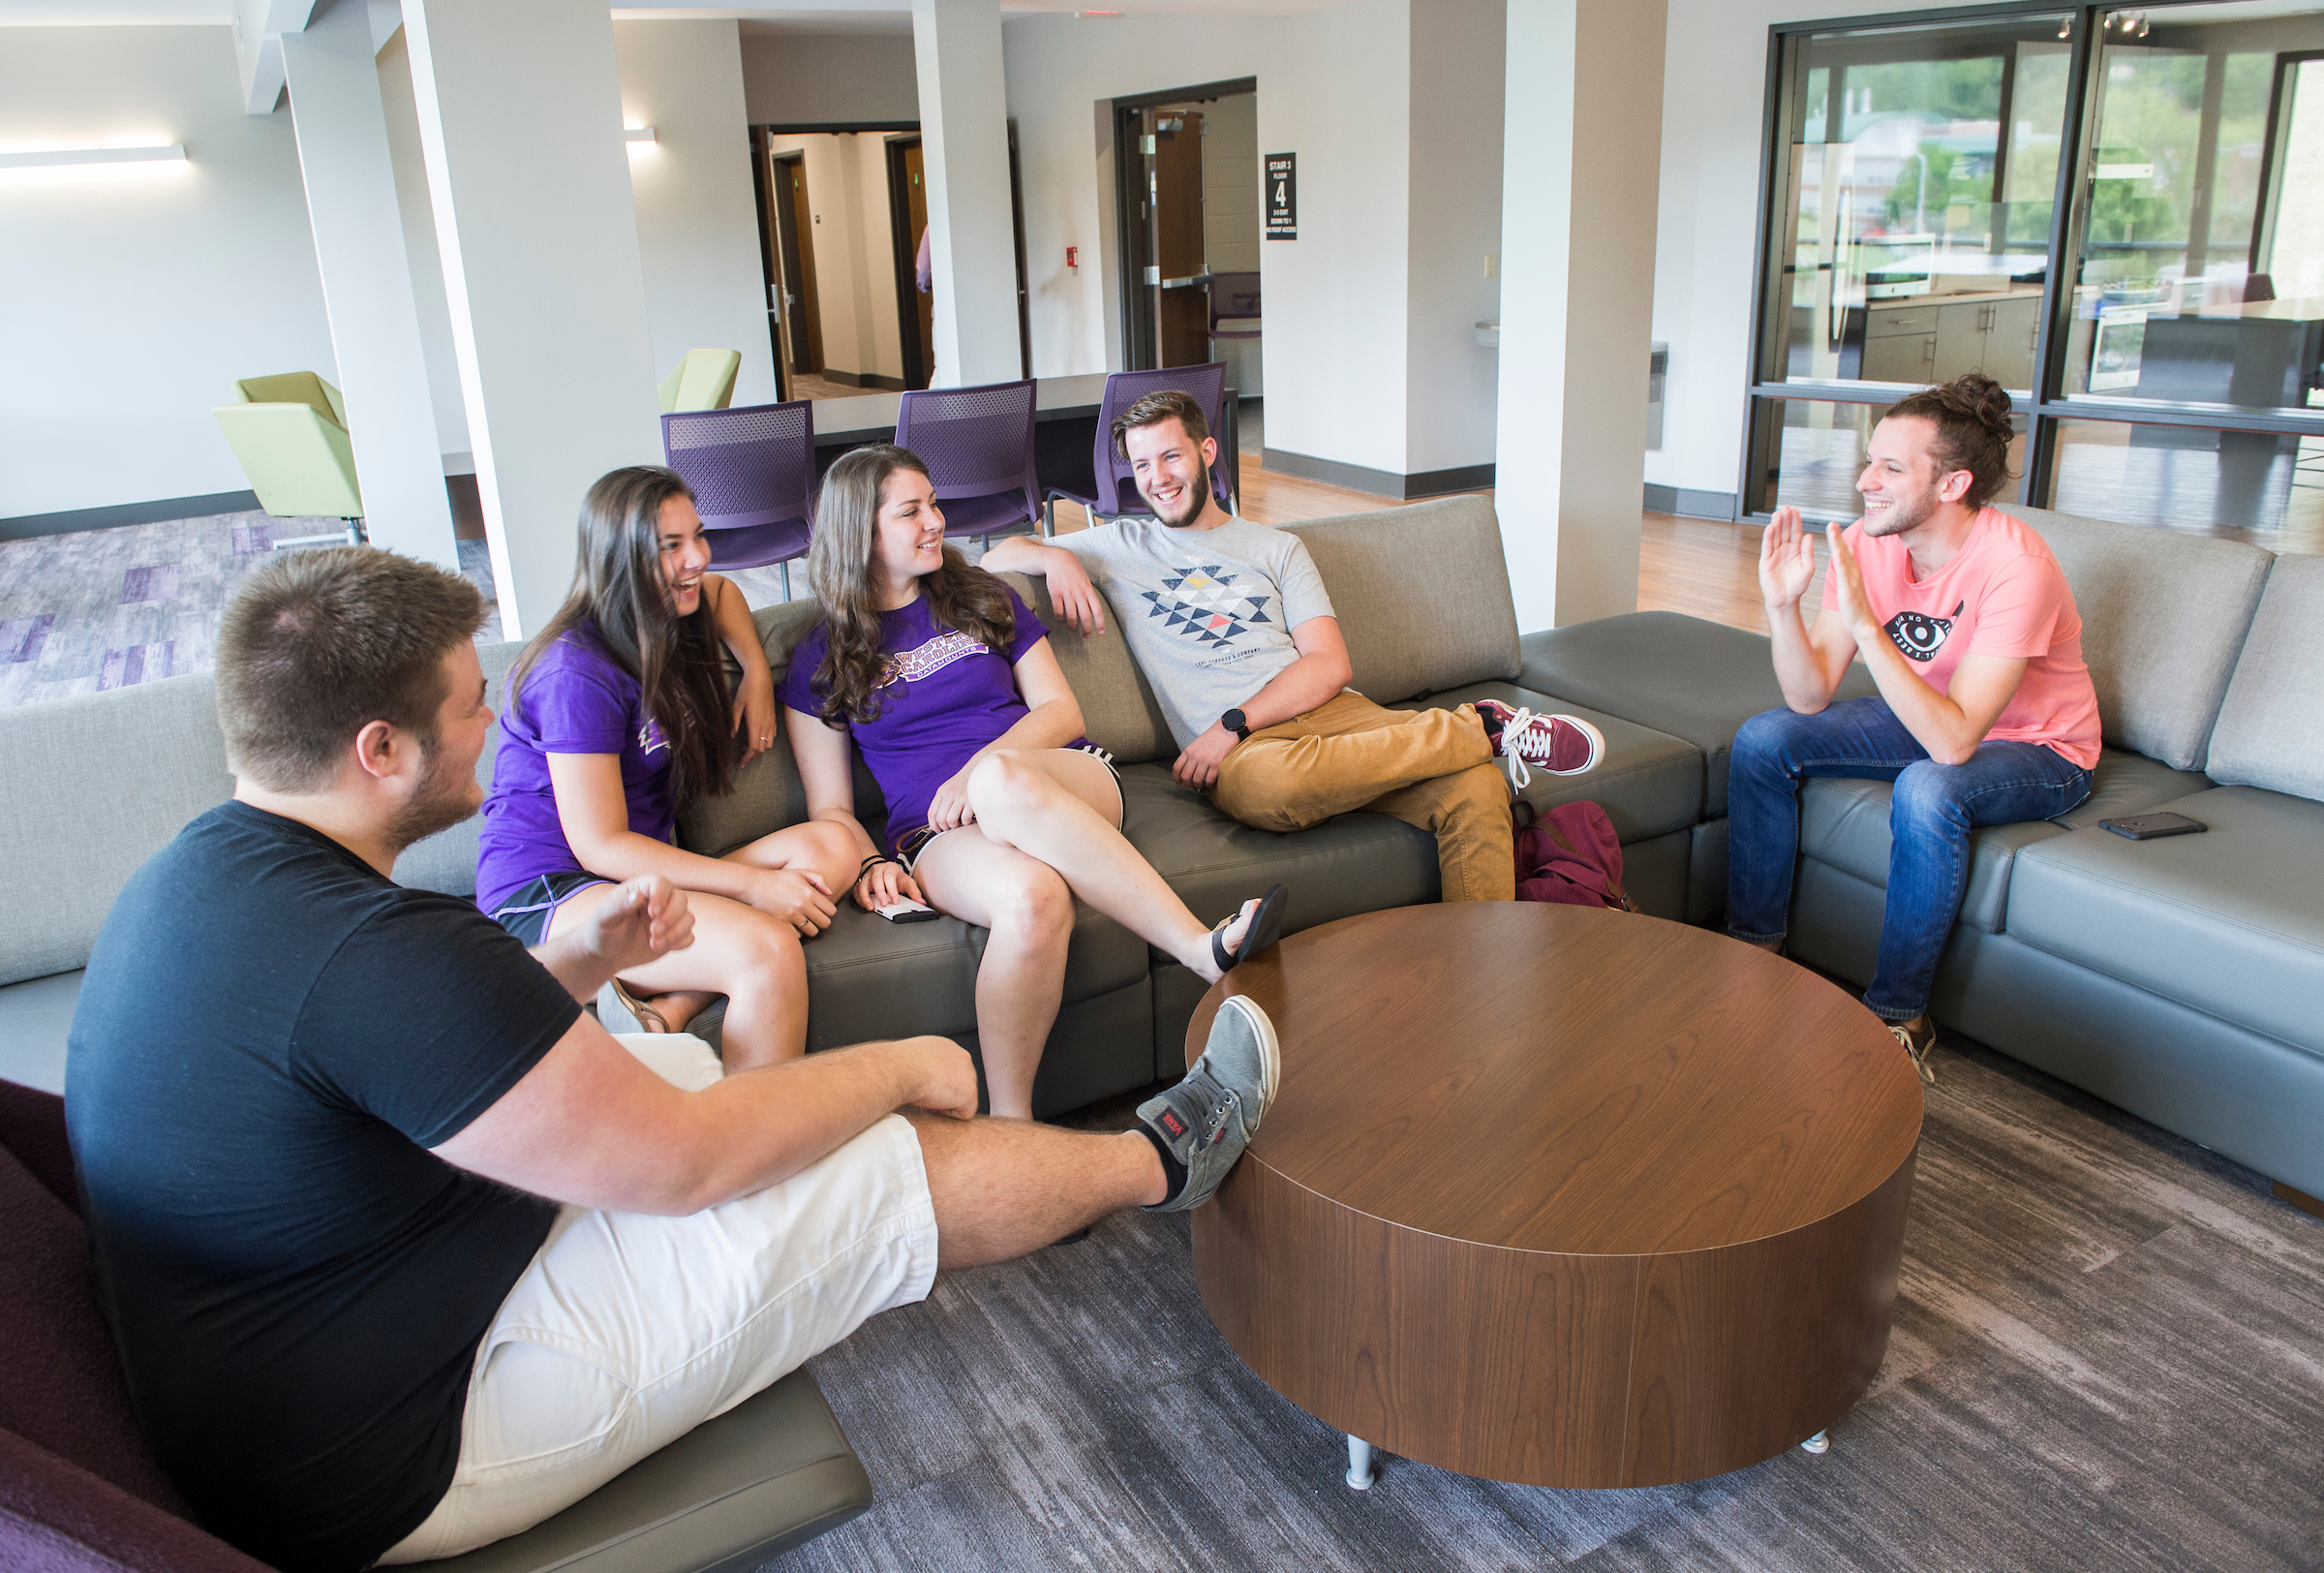 Students spending time, hanging out together in the common area of a Residence Hall